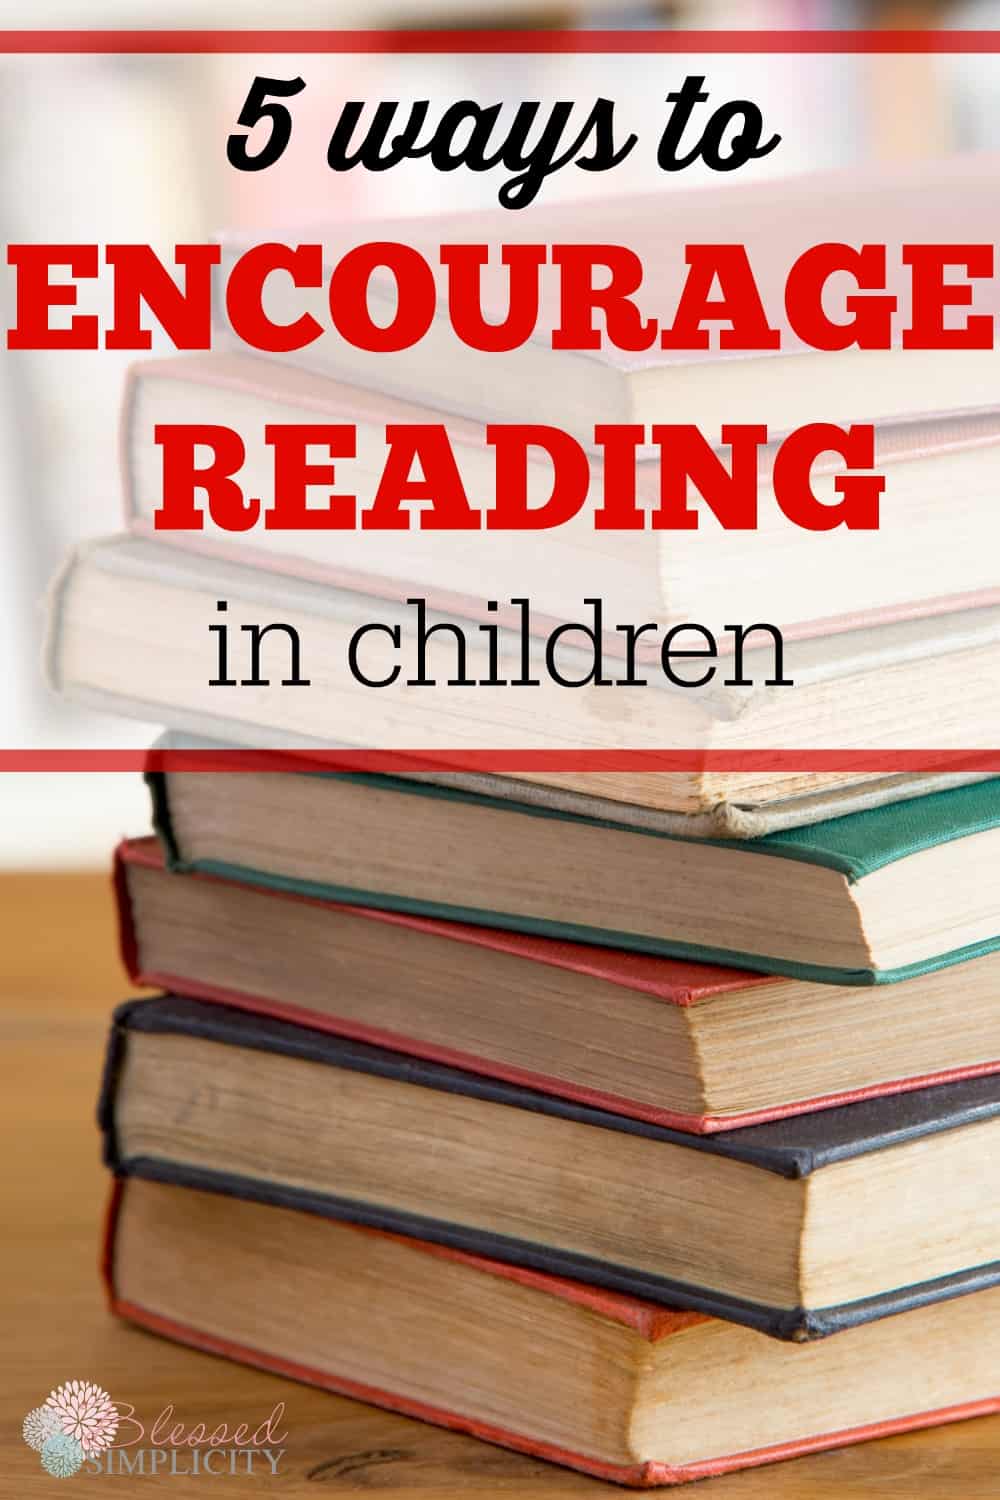 Encourage reading in children to improve vocabulary, focus and comprehension. Read aloud time at home can significantly affect school performance!